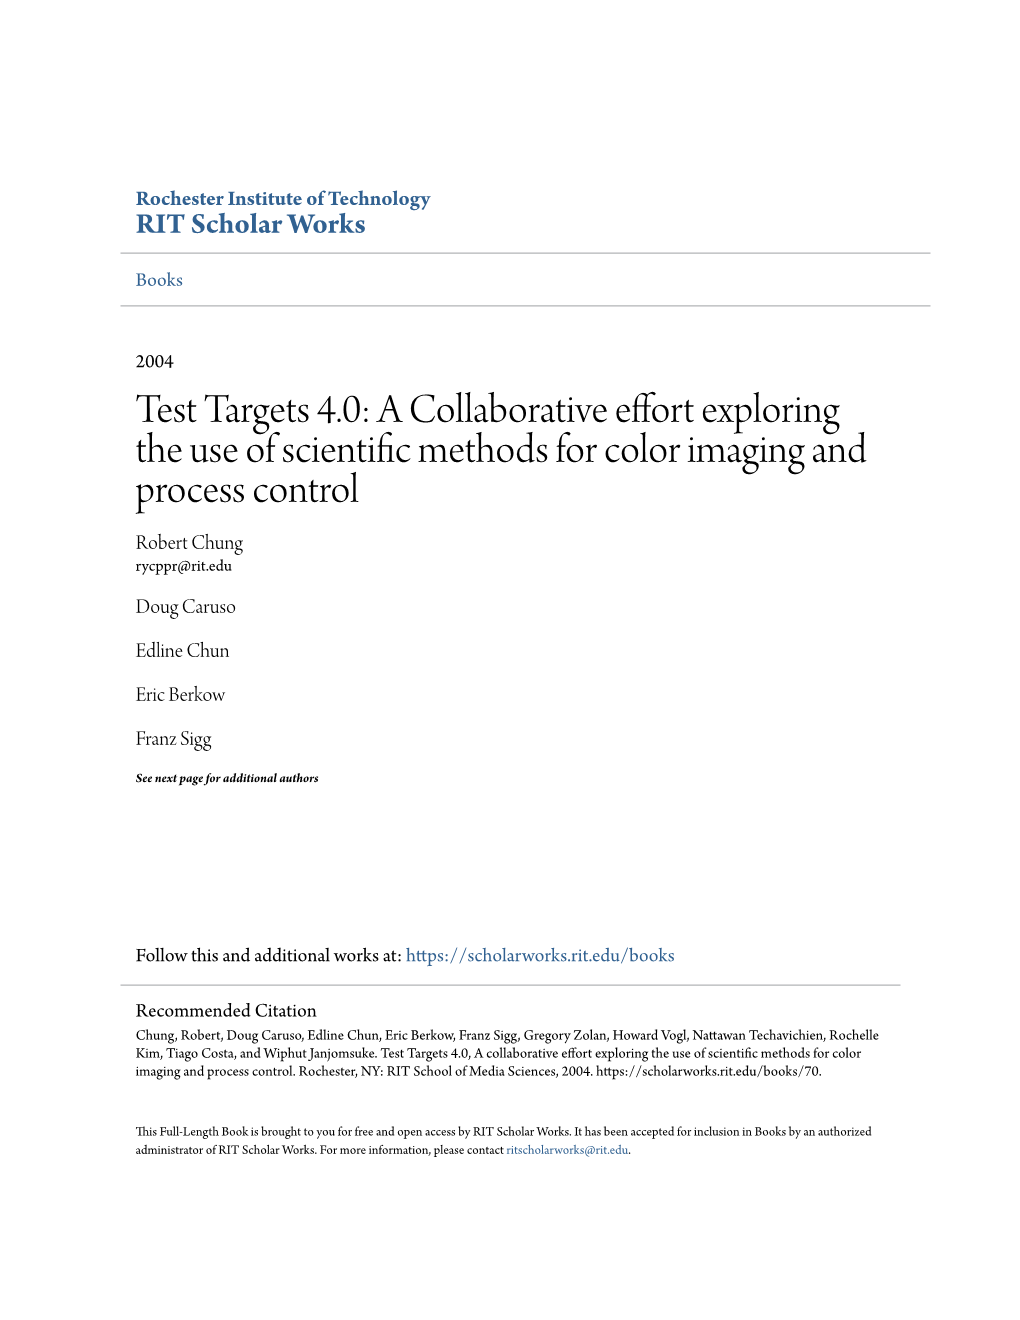 Test Targets 4.0: a Collaborative Effort Exploring the Use of Scientific Methods for Color Imaging and Process Control Robert Chung Rycppr@Rit.Edu